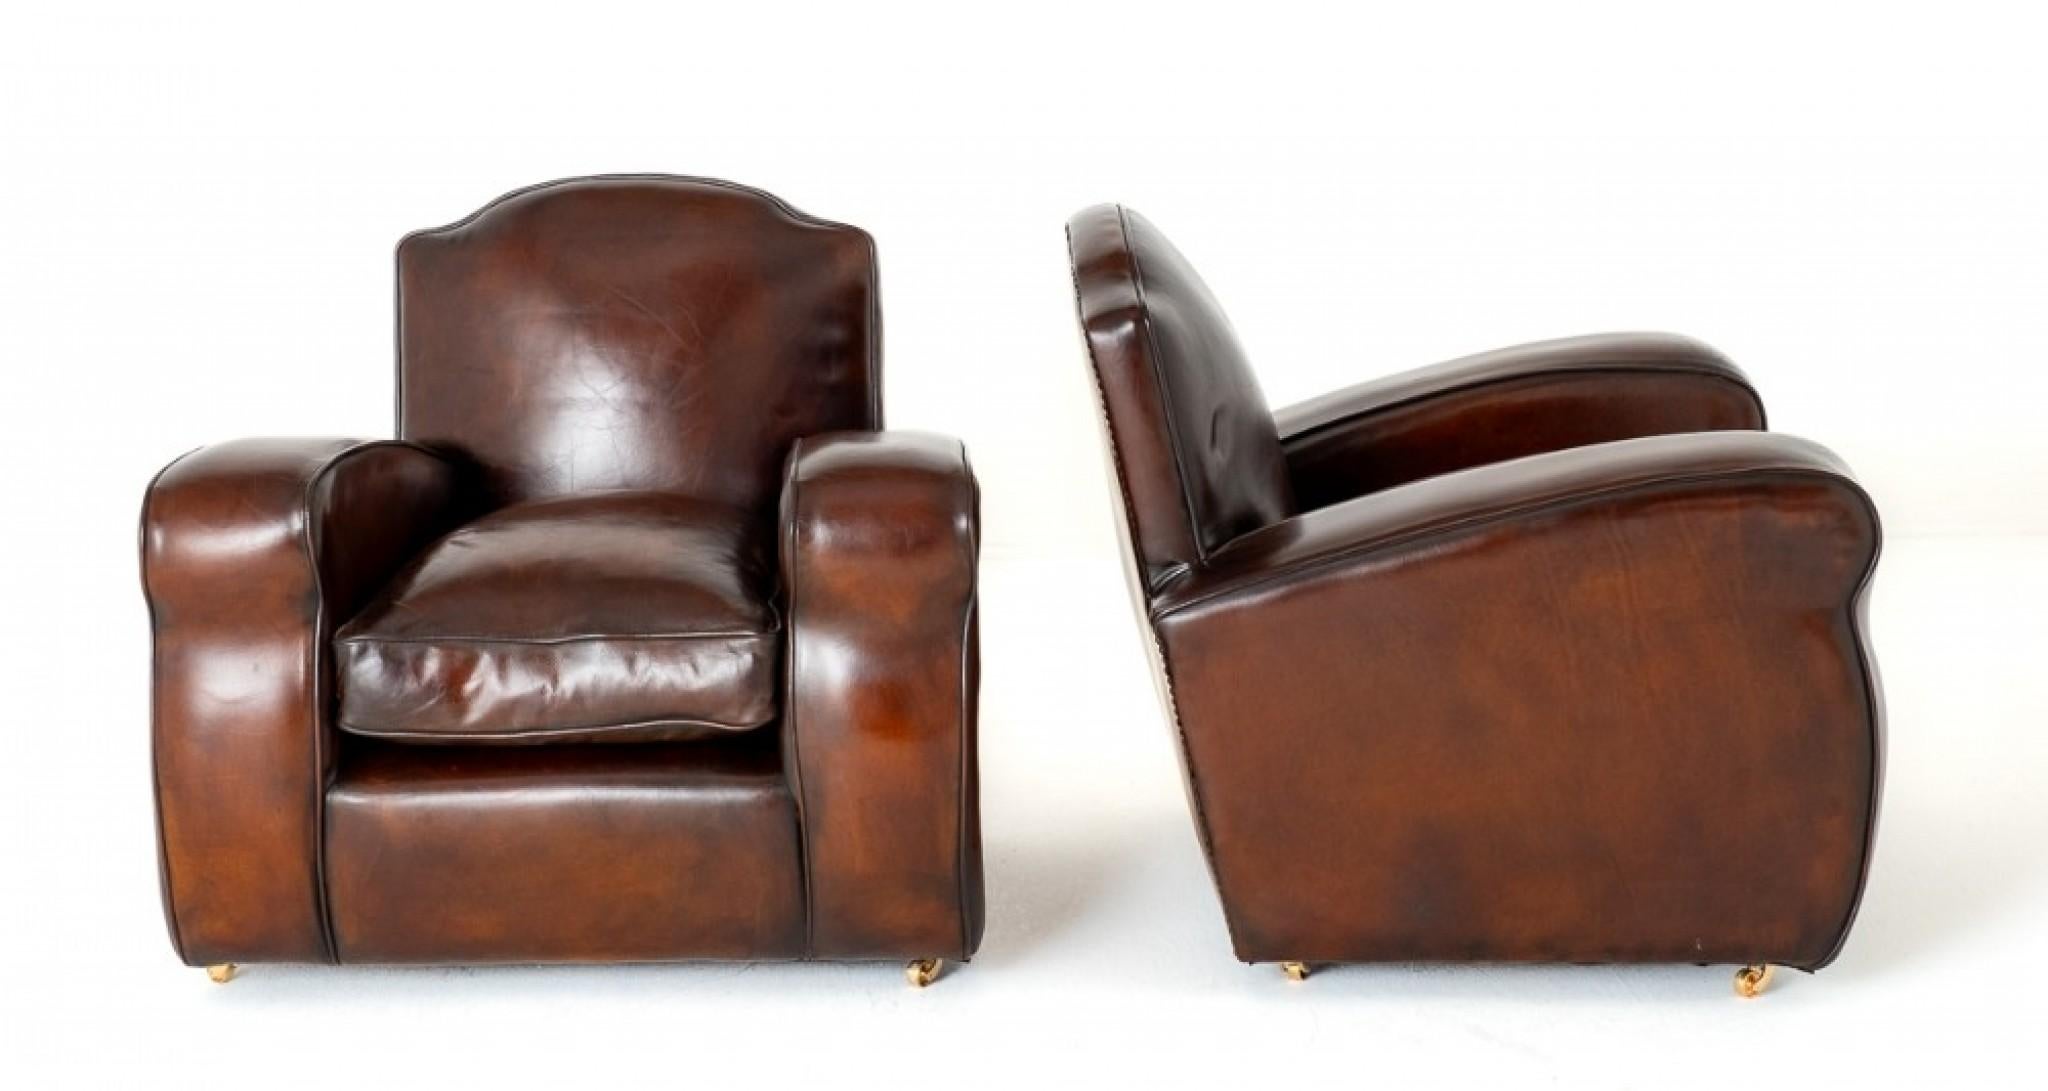 Good Pair of Art Deco Leather Club Chairs.
These Club Chairs Feature Typical Art Deco Wide Shaped Arms and a Stylish Shaped Back.
The Chairs Having a Leather Filled Cushion making them very Comfortable.
The Chairs Being of a Lovely Tobacco